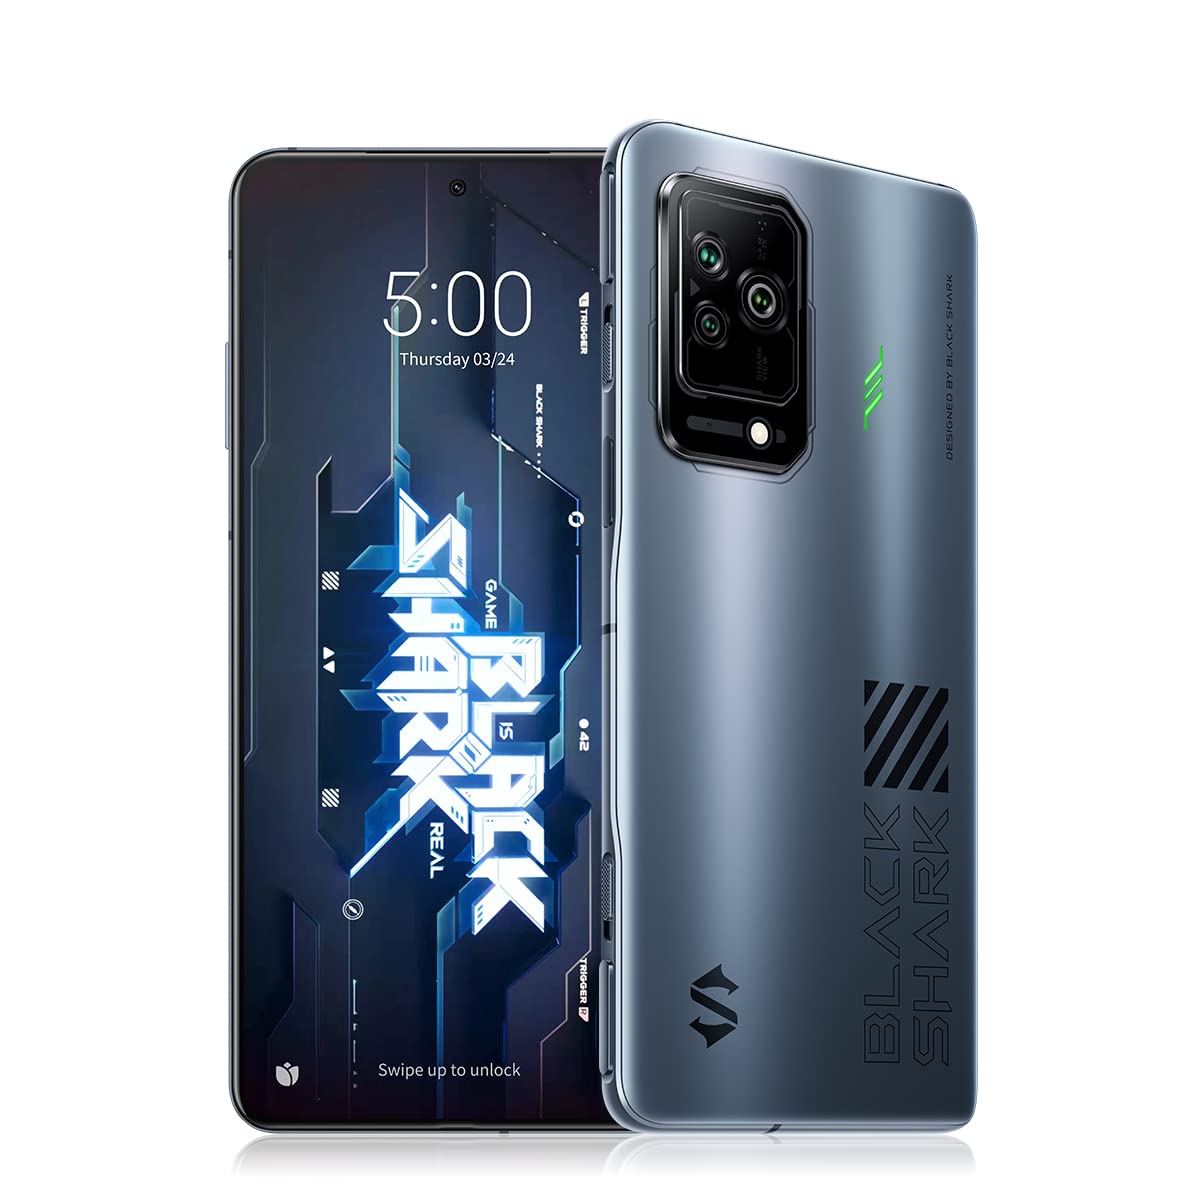 xiaomi-launches-black-shark-gaming-phone-snapdragon-845-liquid-cooling-and-up-to-8gb-ram